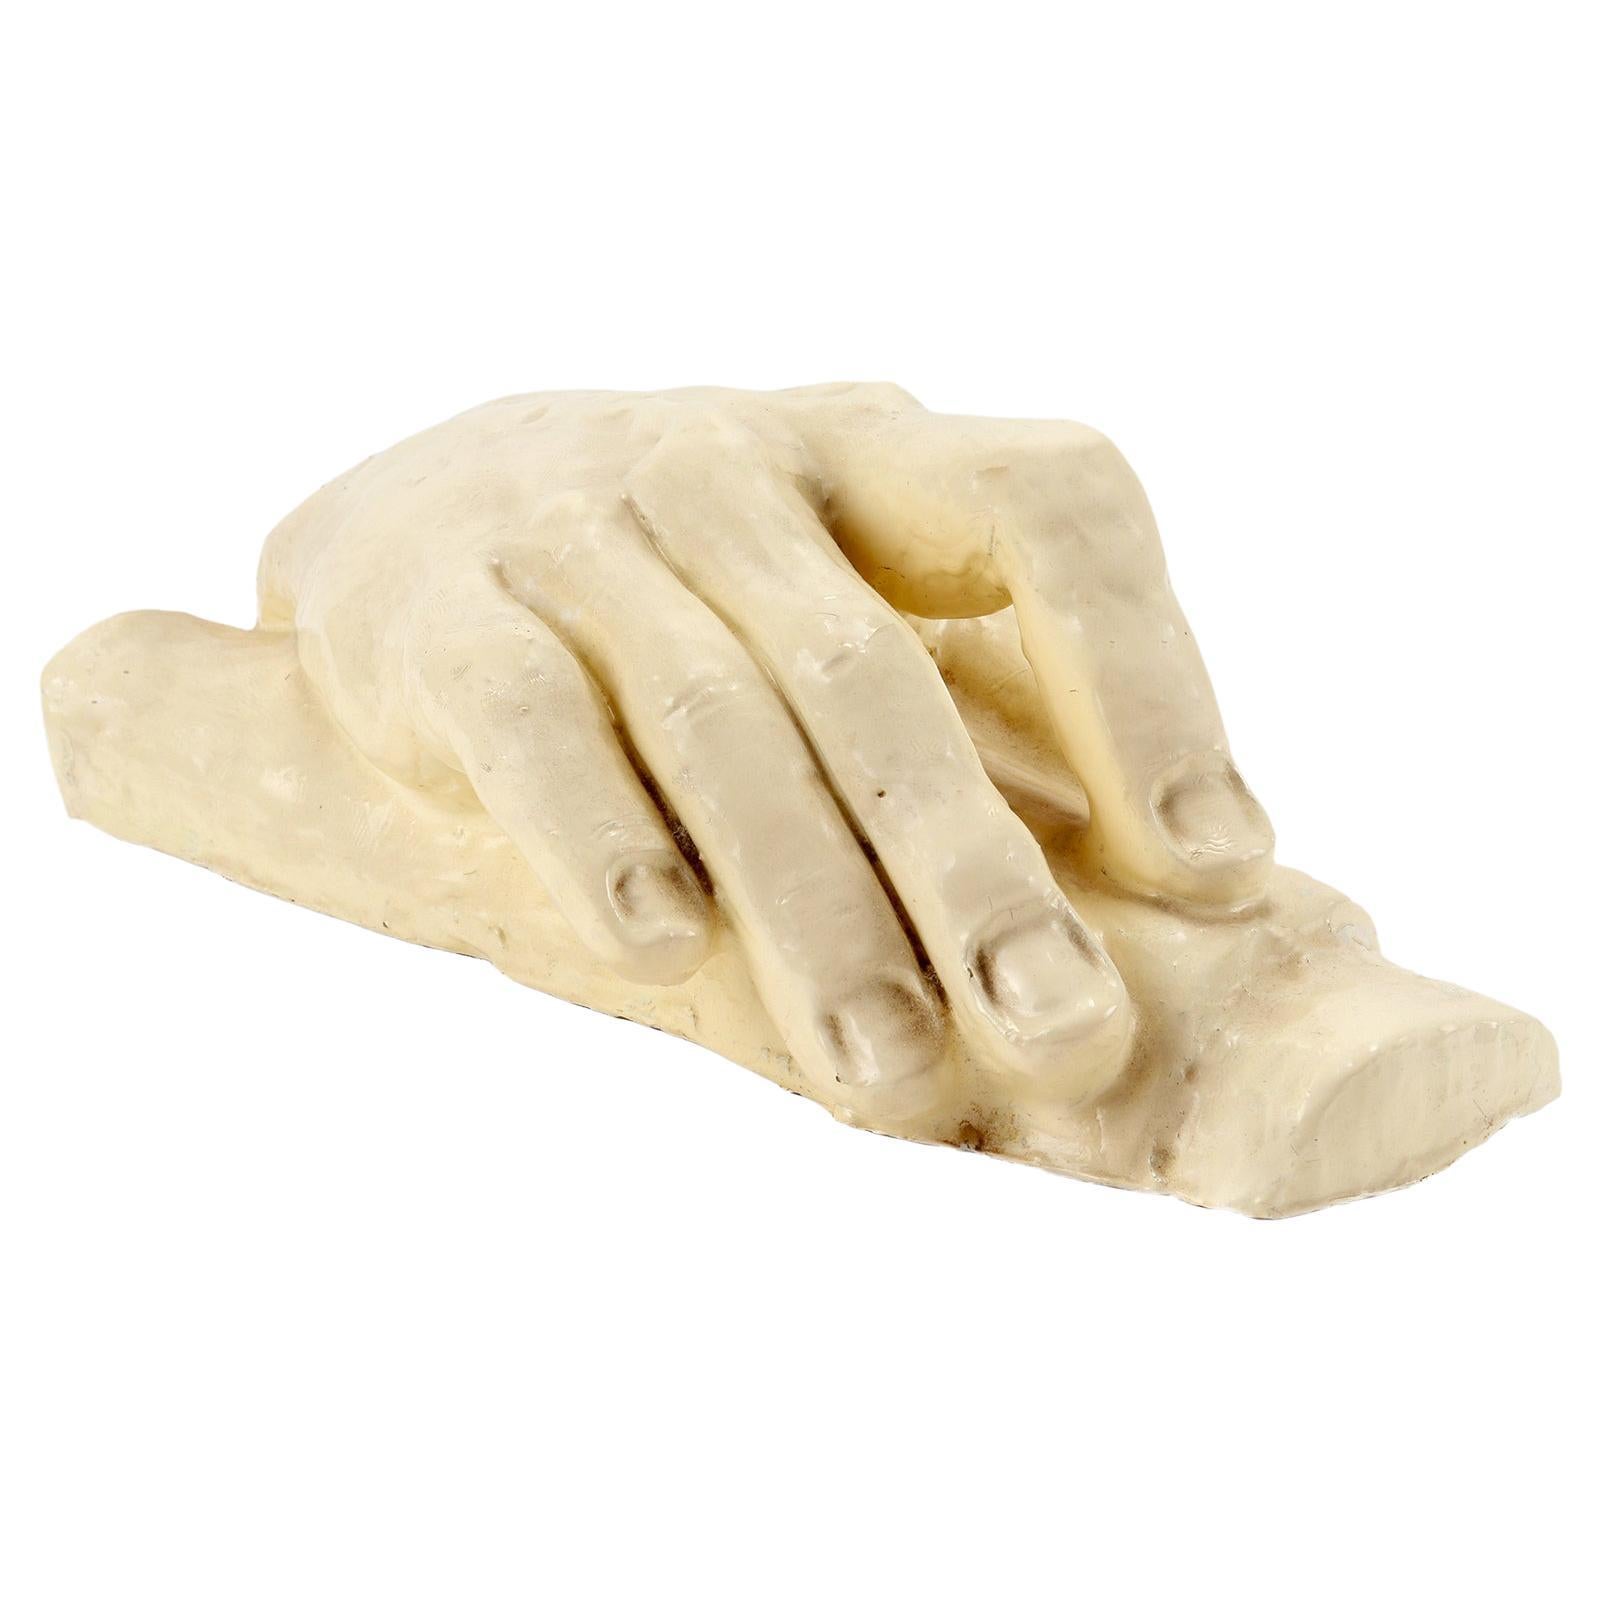 Glazed Clay Sculpture Depicting a Hand, Italy 1900